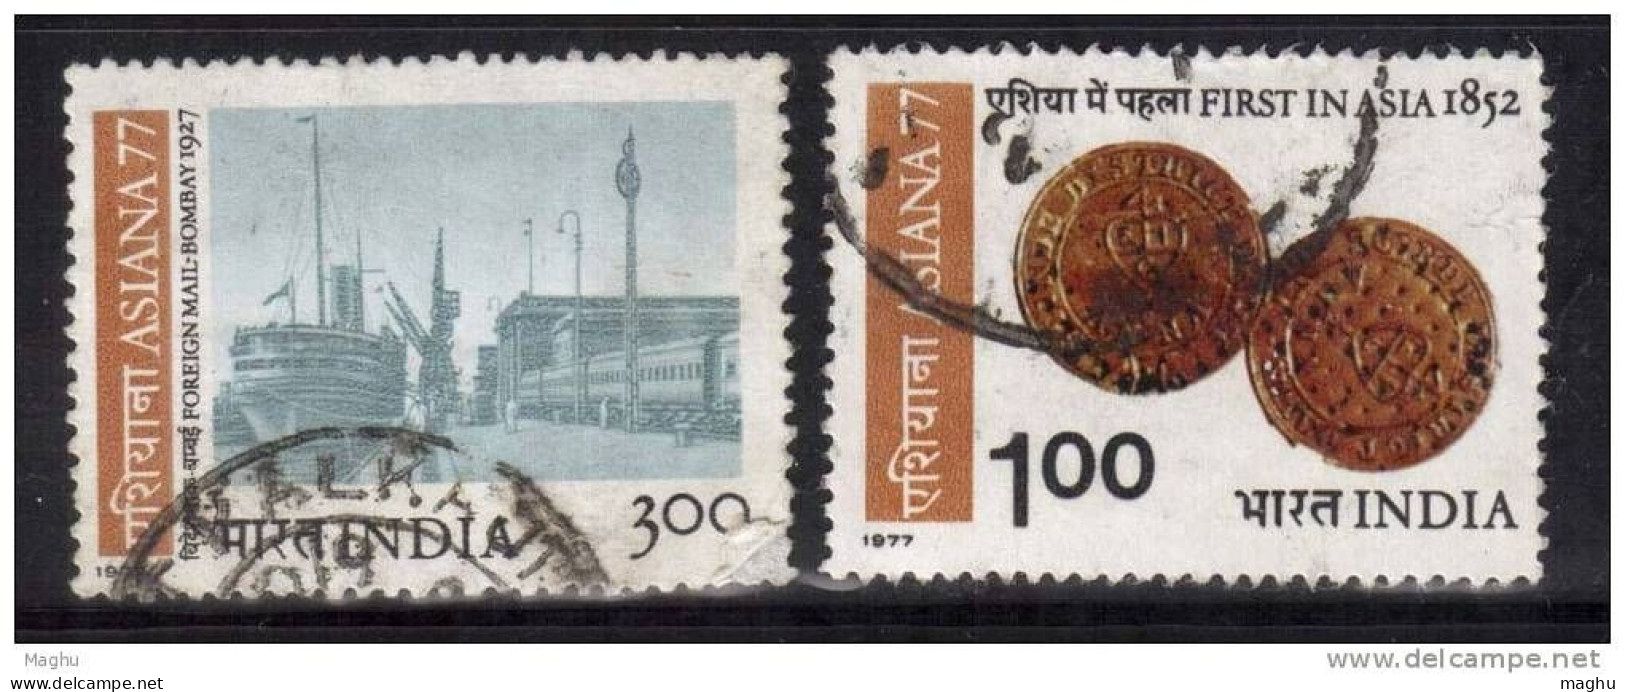 India Used 1977, Set Of 2, ASIANA 77, Scinde Dawk, Foreign Mail By Ship, Train At Platform, (sample Image) - Used Stamps